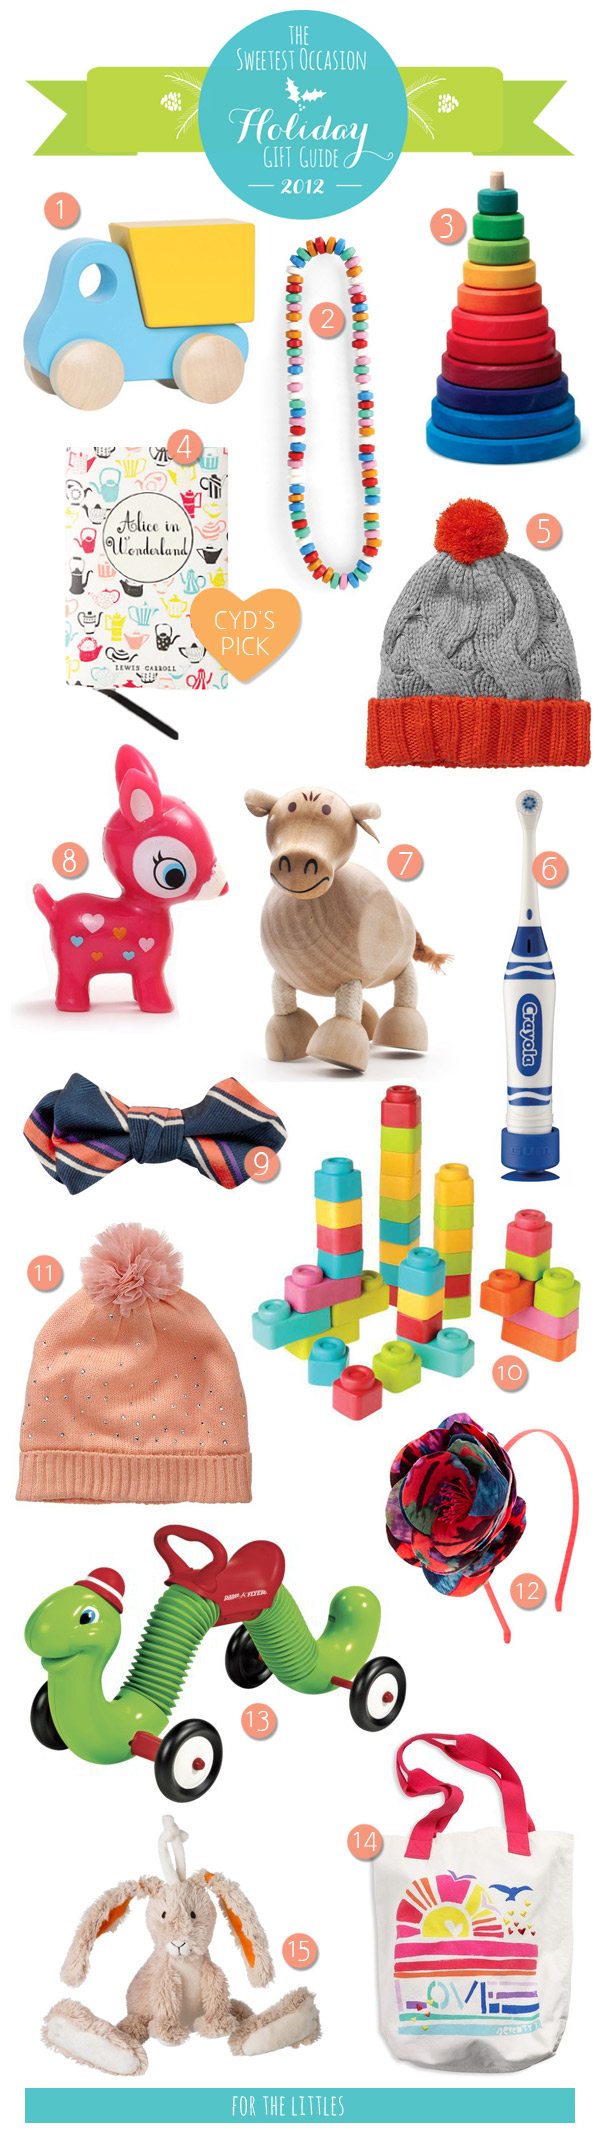 The Gift Guide: For the Littles | The Sweetest Occasion